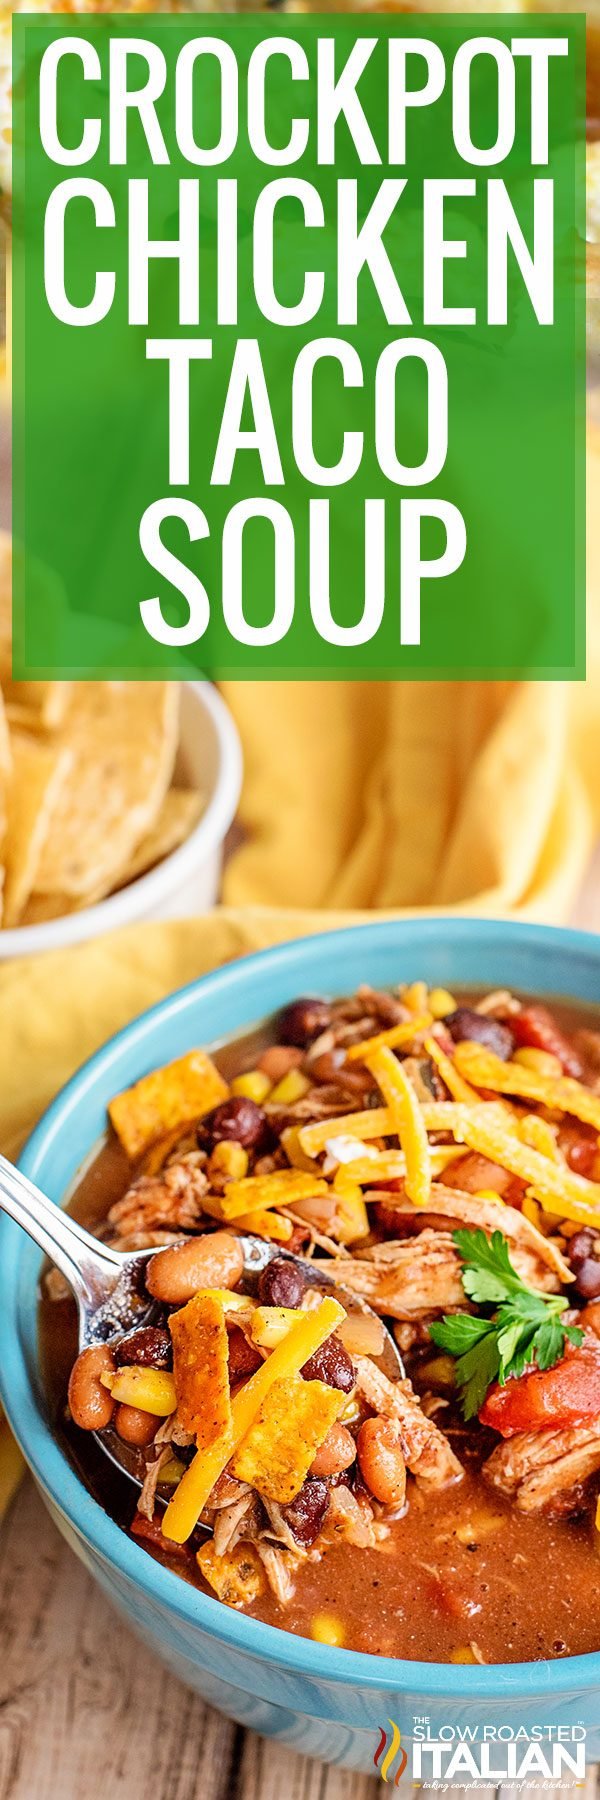 Title text (shown in a blue bowl): Crockpot Chicken Taco Soup